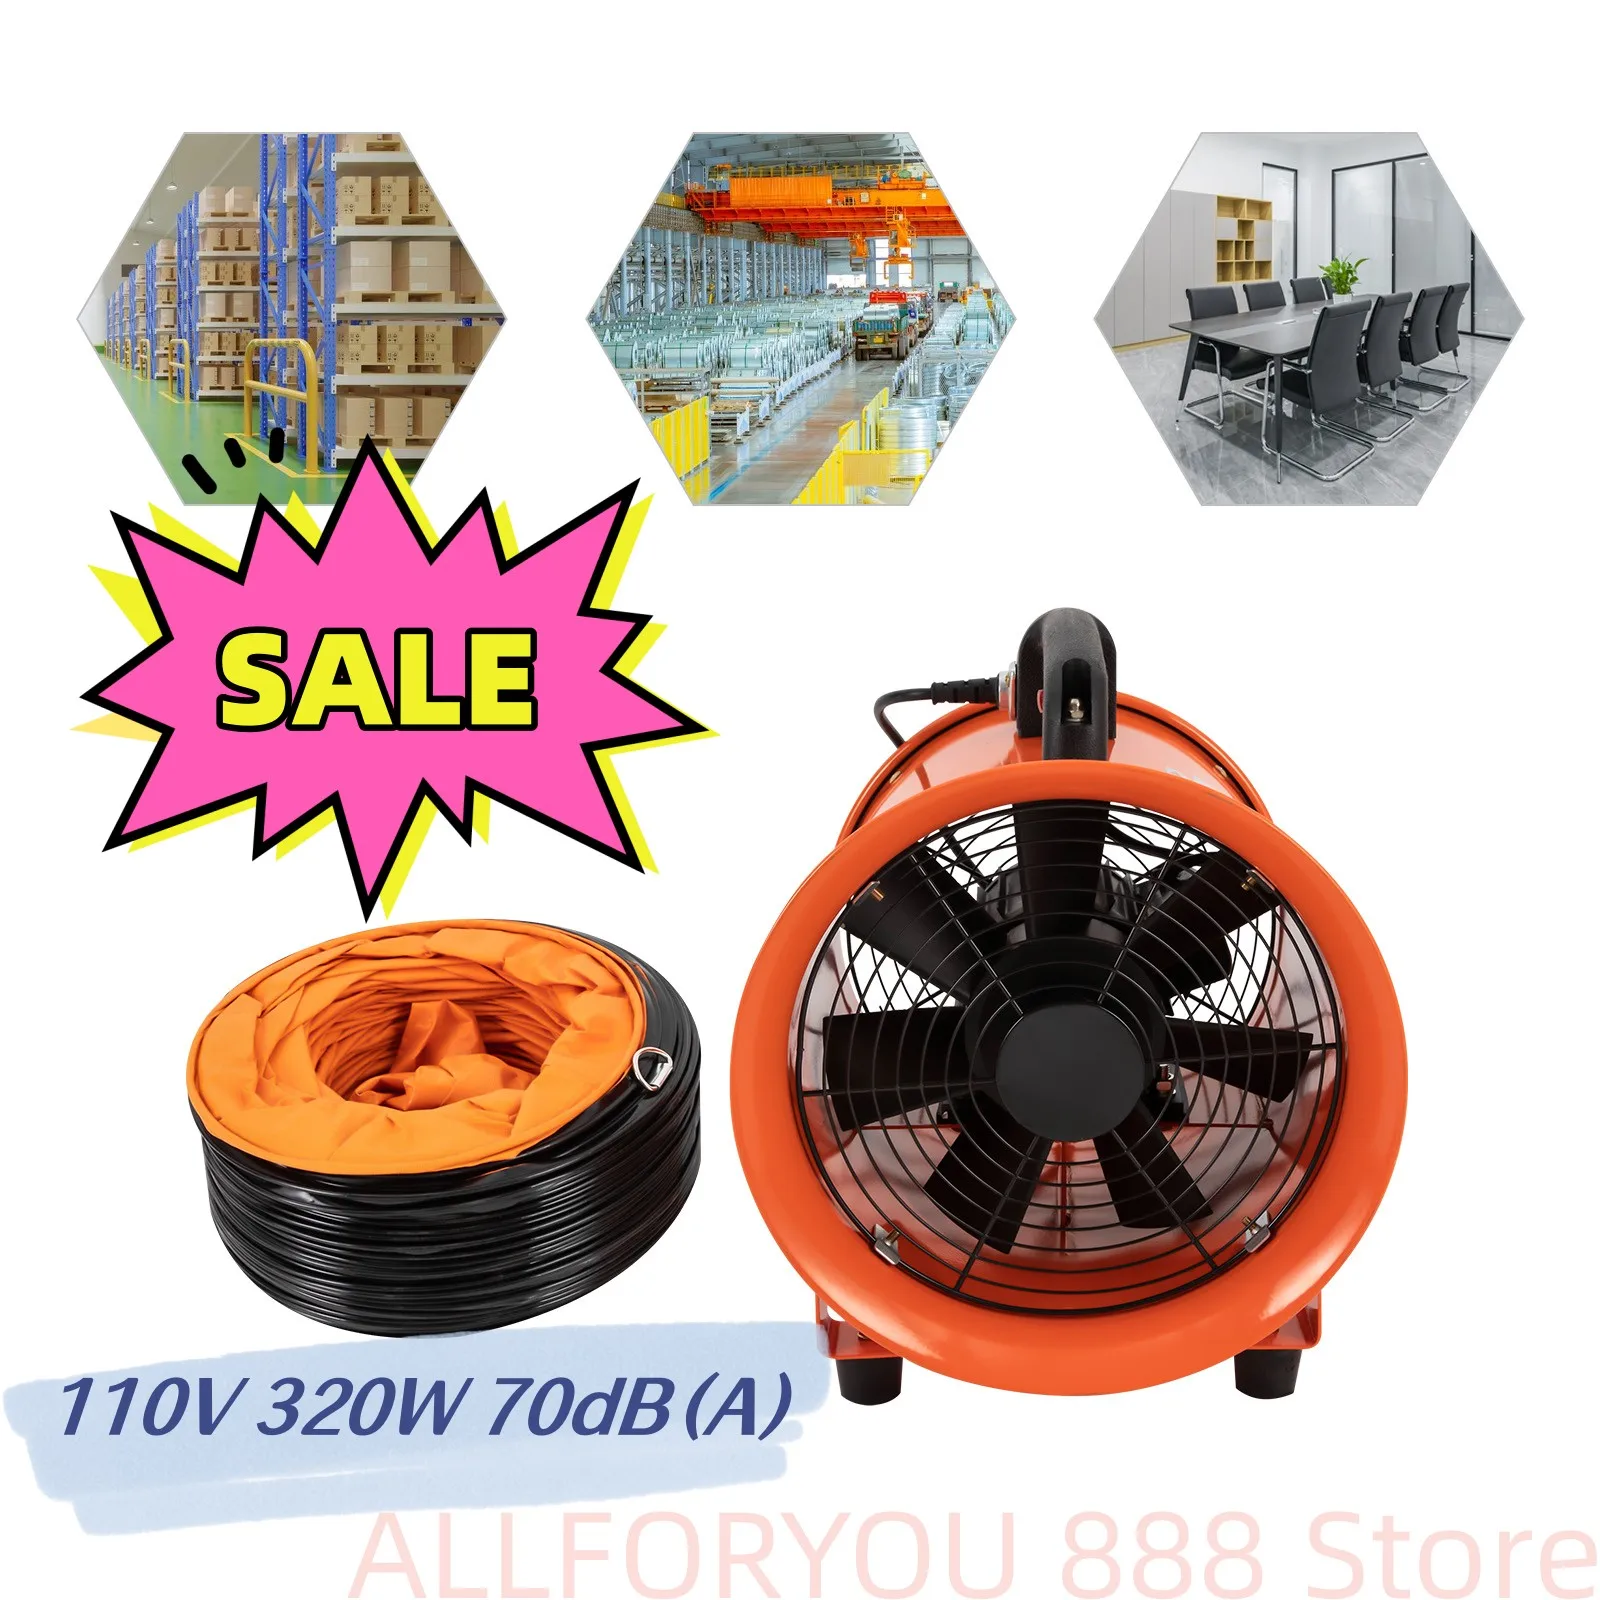 320W 10-inch Utility Blower Fan Portable Ventilator High Velocity Tool With 5M /10M Duct Hose 800082006200 320w